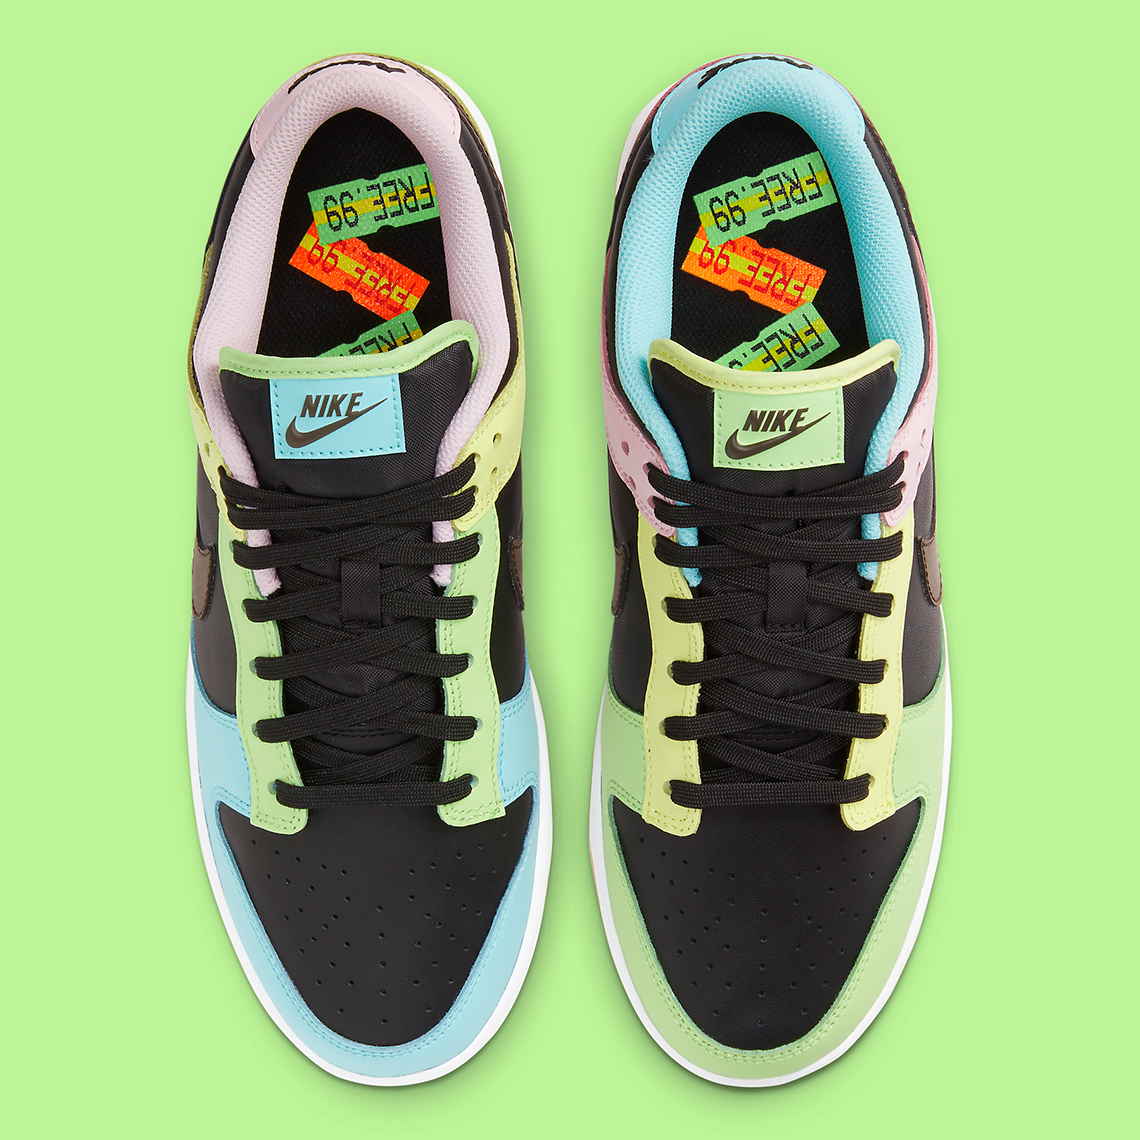 NIKE AIR MAX 1 PRINT Free 99 Dh0952 001 Official Images 10